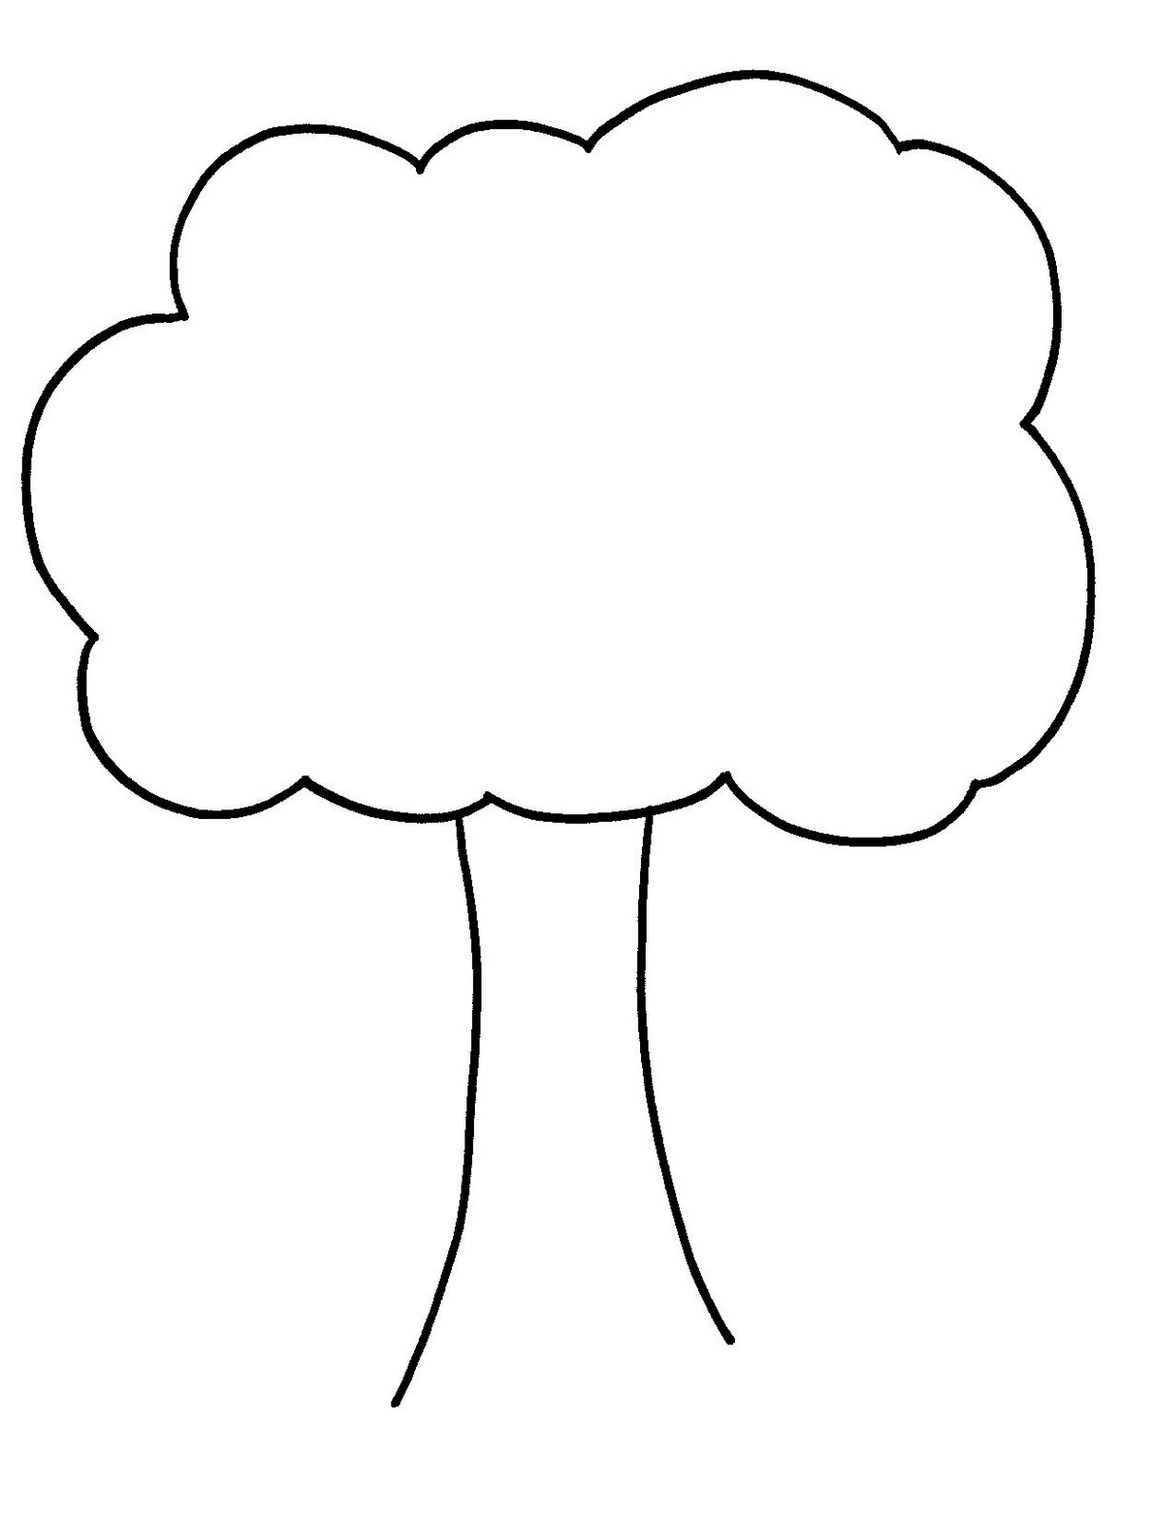 Outline Of Tree With Branches Clipart - Free to use Clip Art Resource